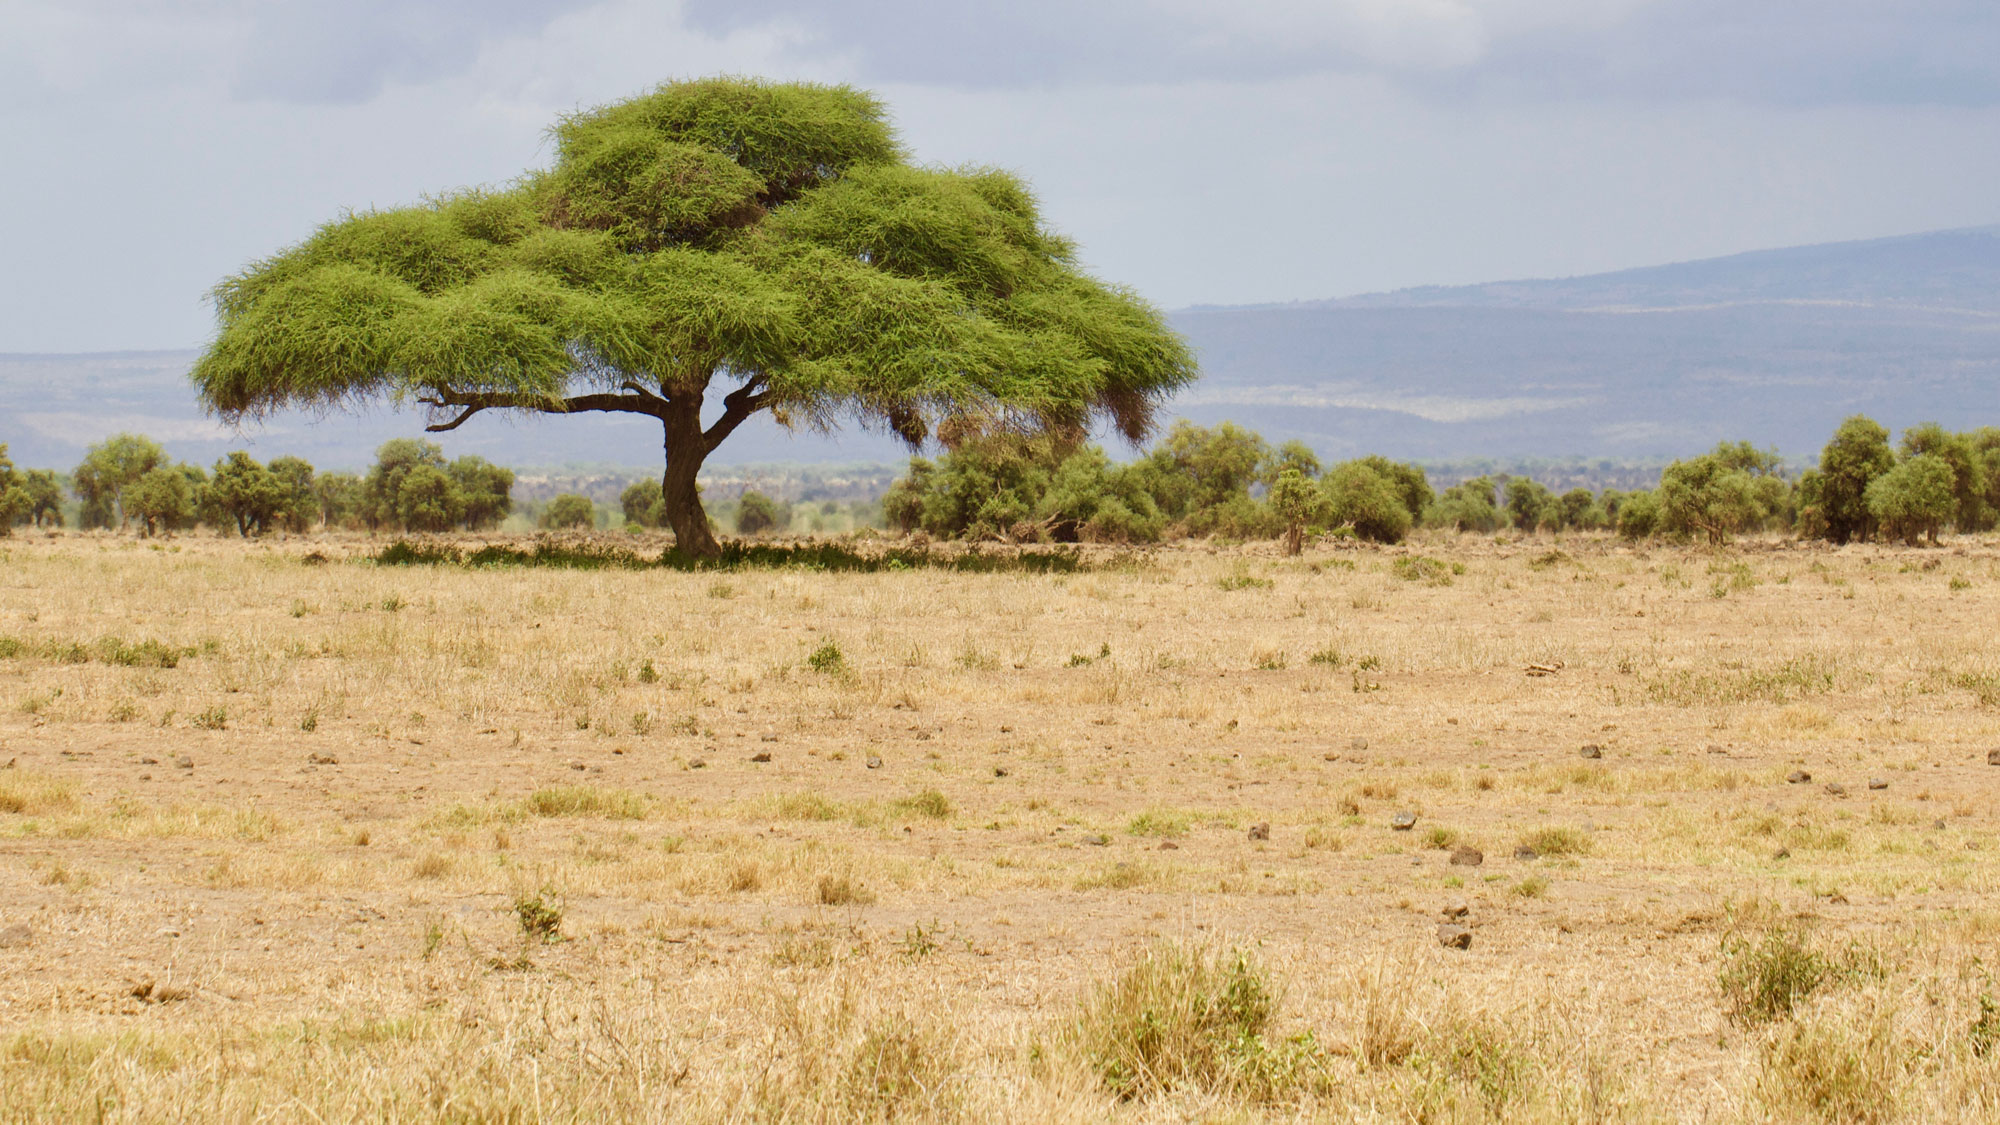 Photograph of a large acacia tree on the savanna in Amboseli National Park, Kenya. The photo shows a tree with a single trunk and an umbrella-like crown growing in a flat landscape with yellow grass. Additional trees or bushes can be seen in the background.